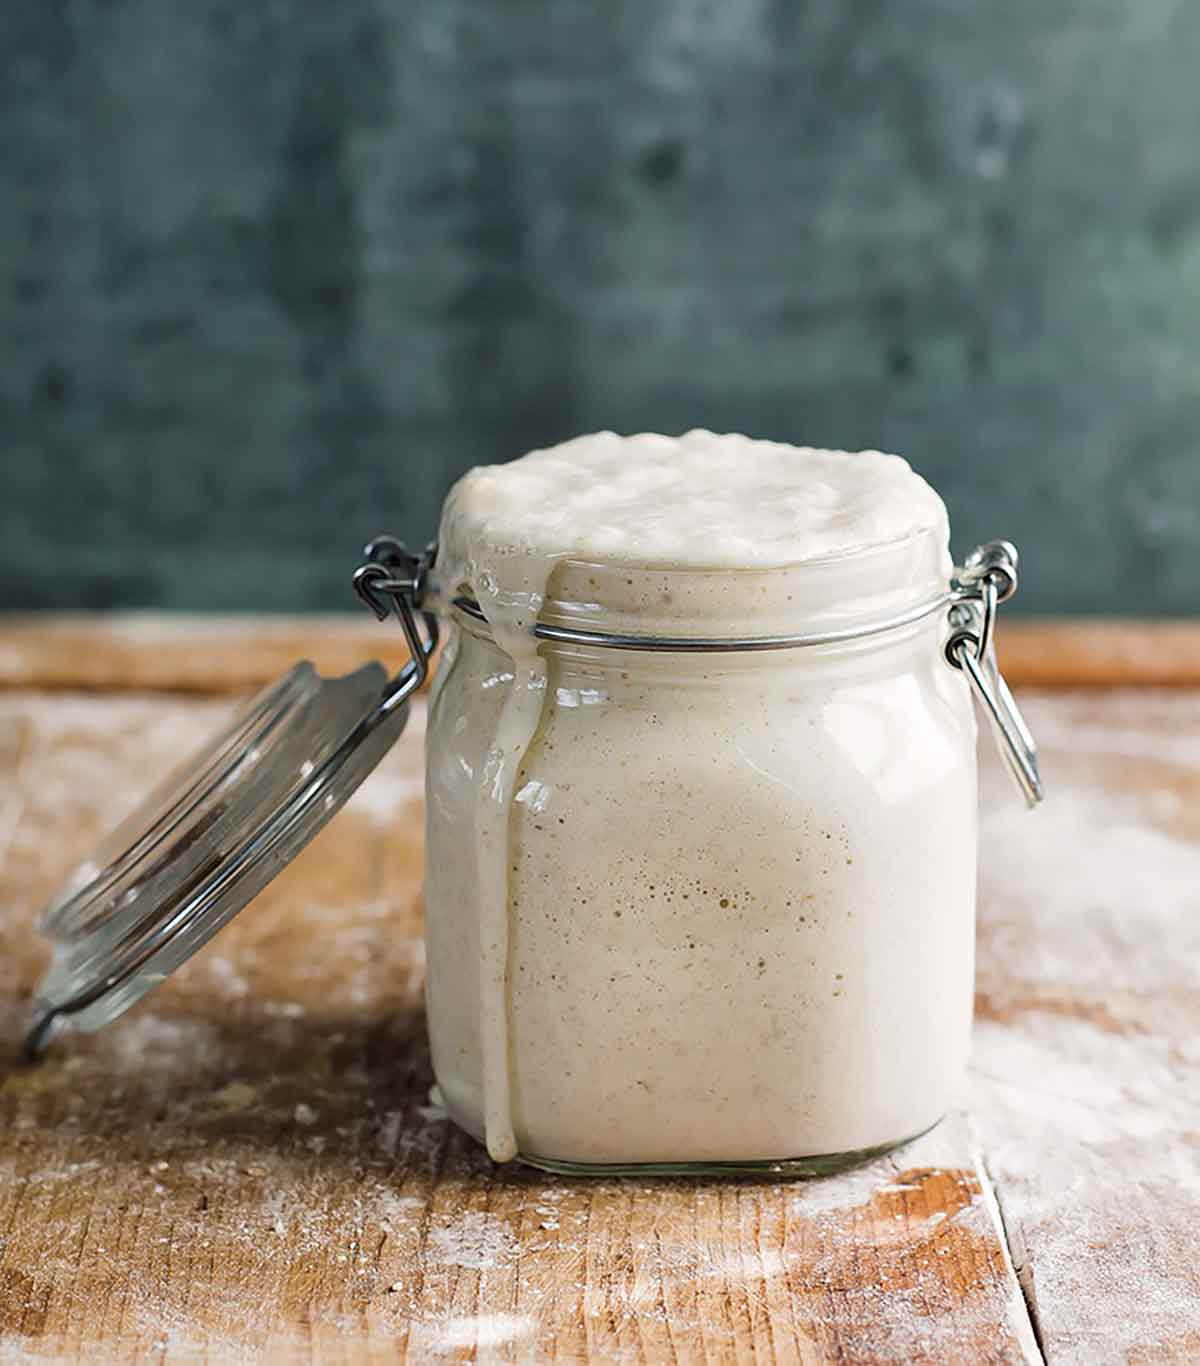 A glass jar with overflowing starter on a wooden surface as part of an explanation on how to make sourdough starter.